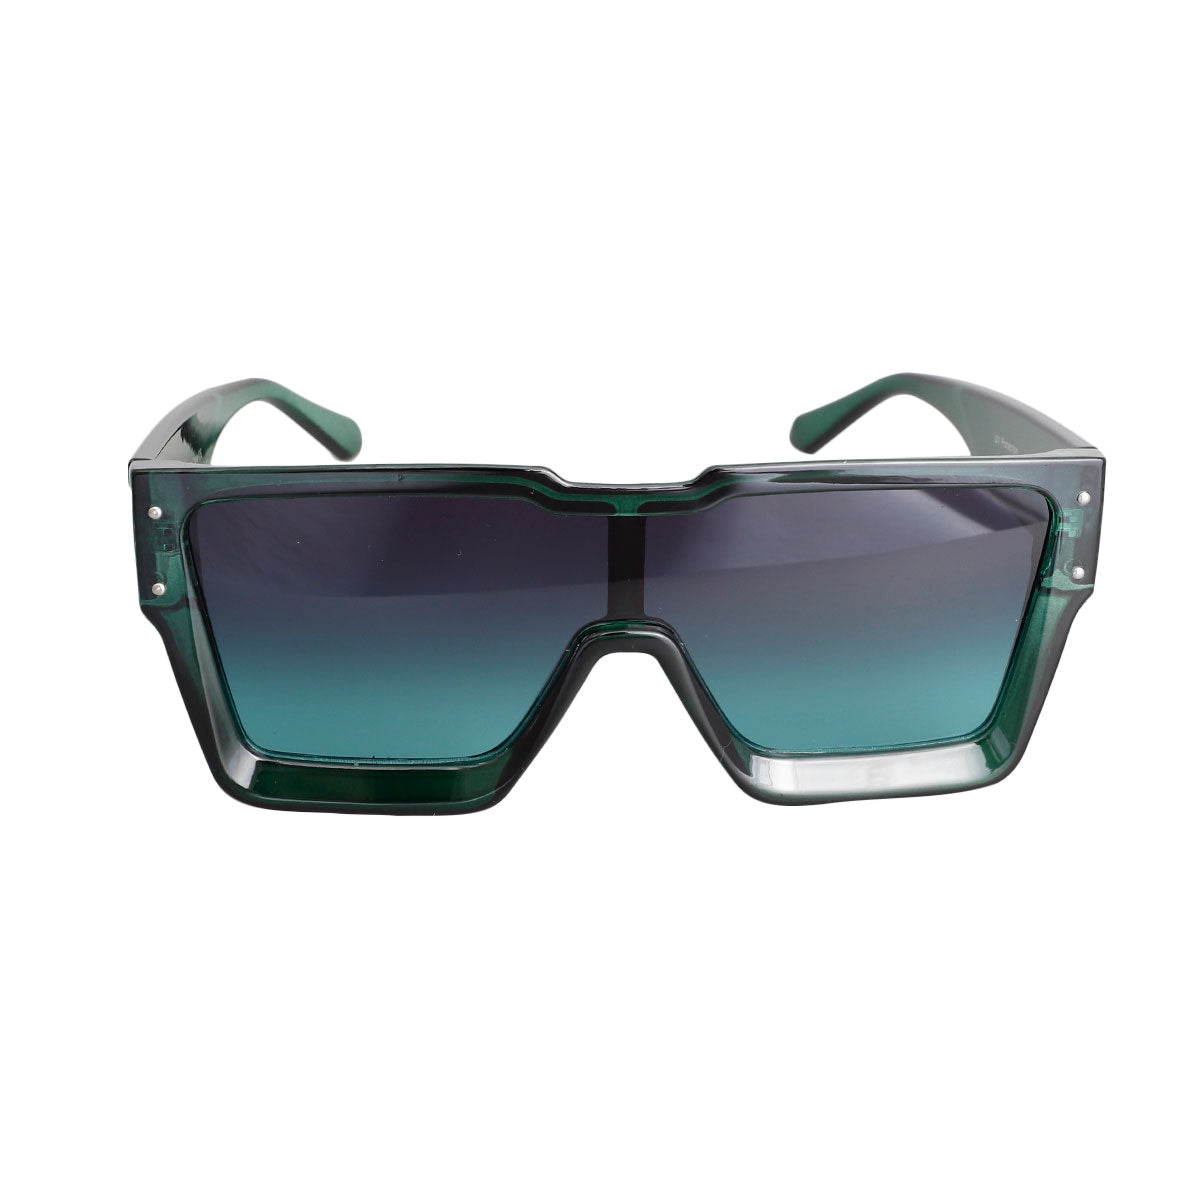 Green Square Thick Frame Sunglasses